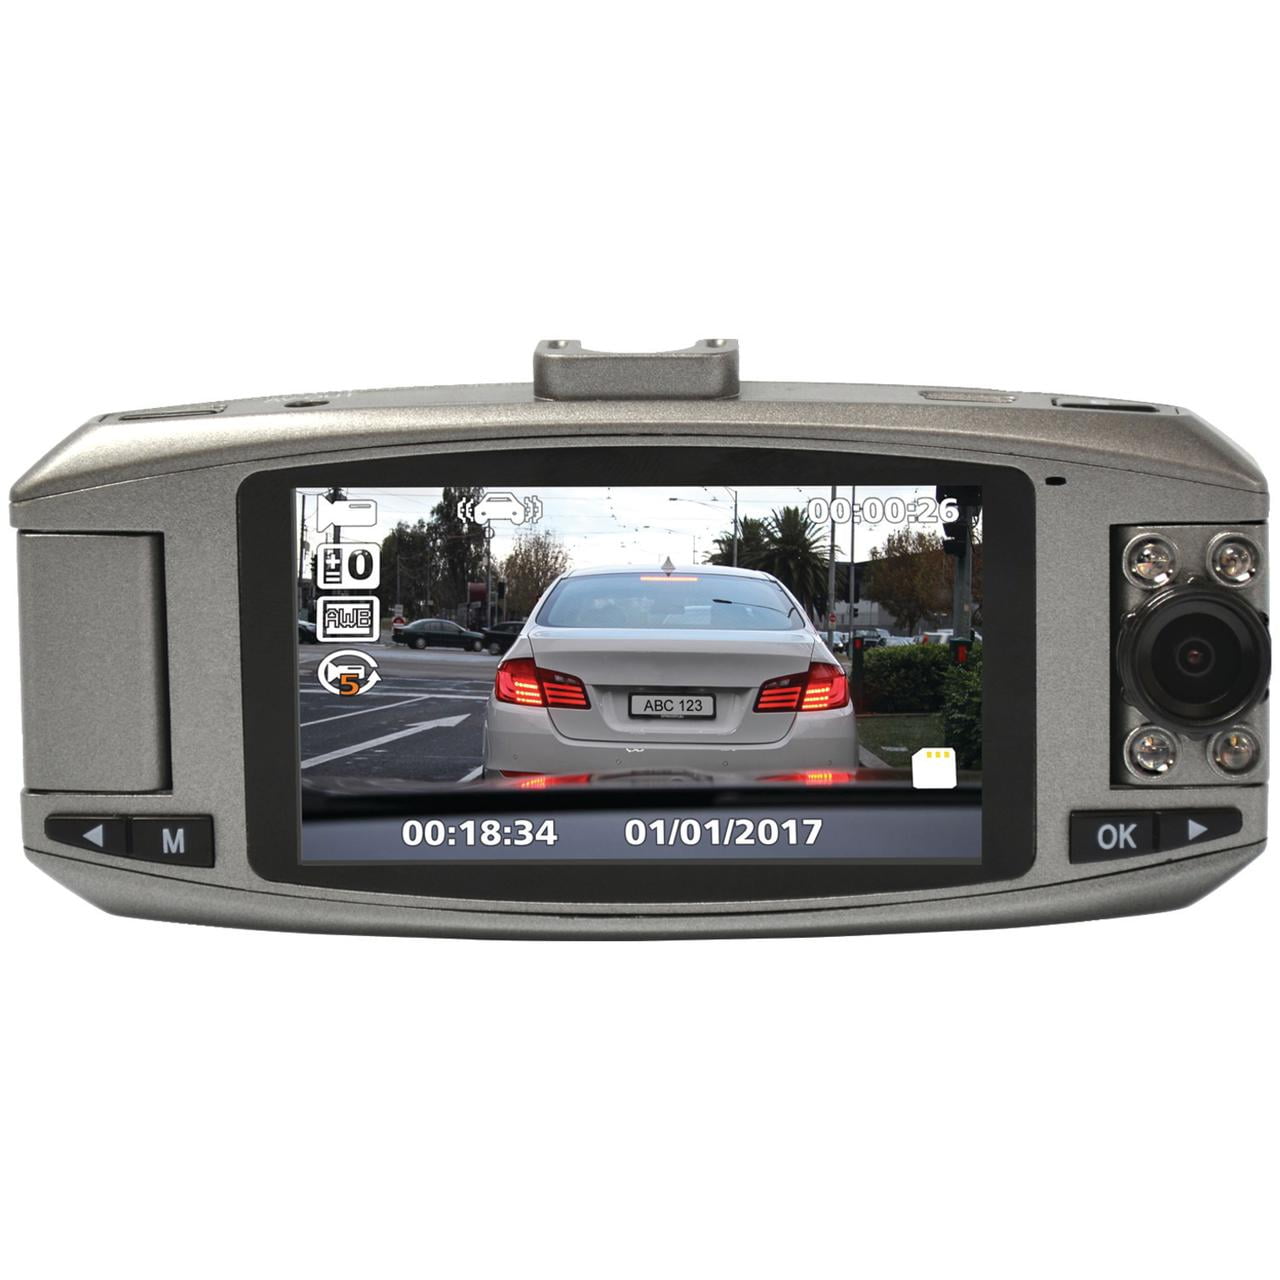 Whistler 1080P High Def Dashboard Camera 170 Wide Angle 2.7" LCD Monitor D17VR 